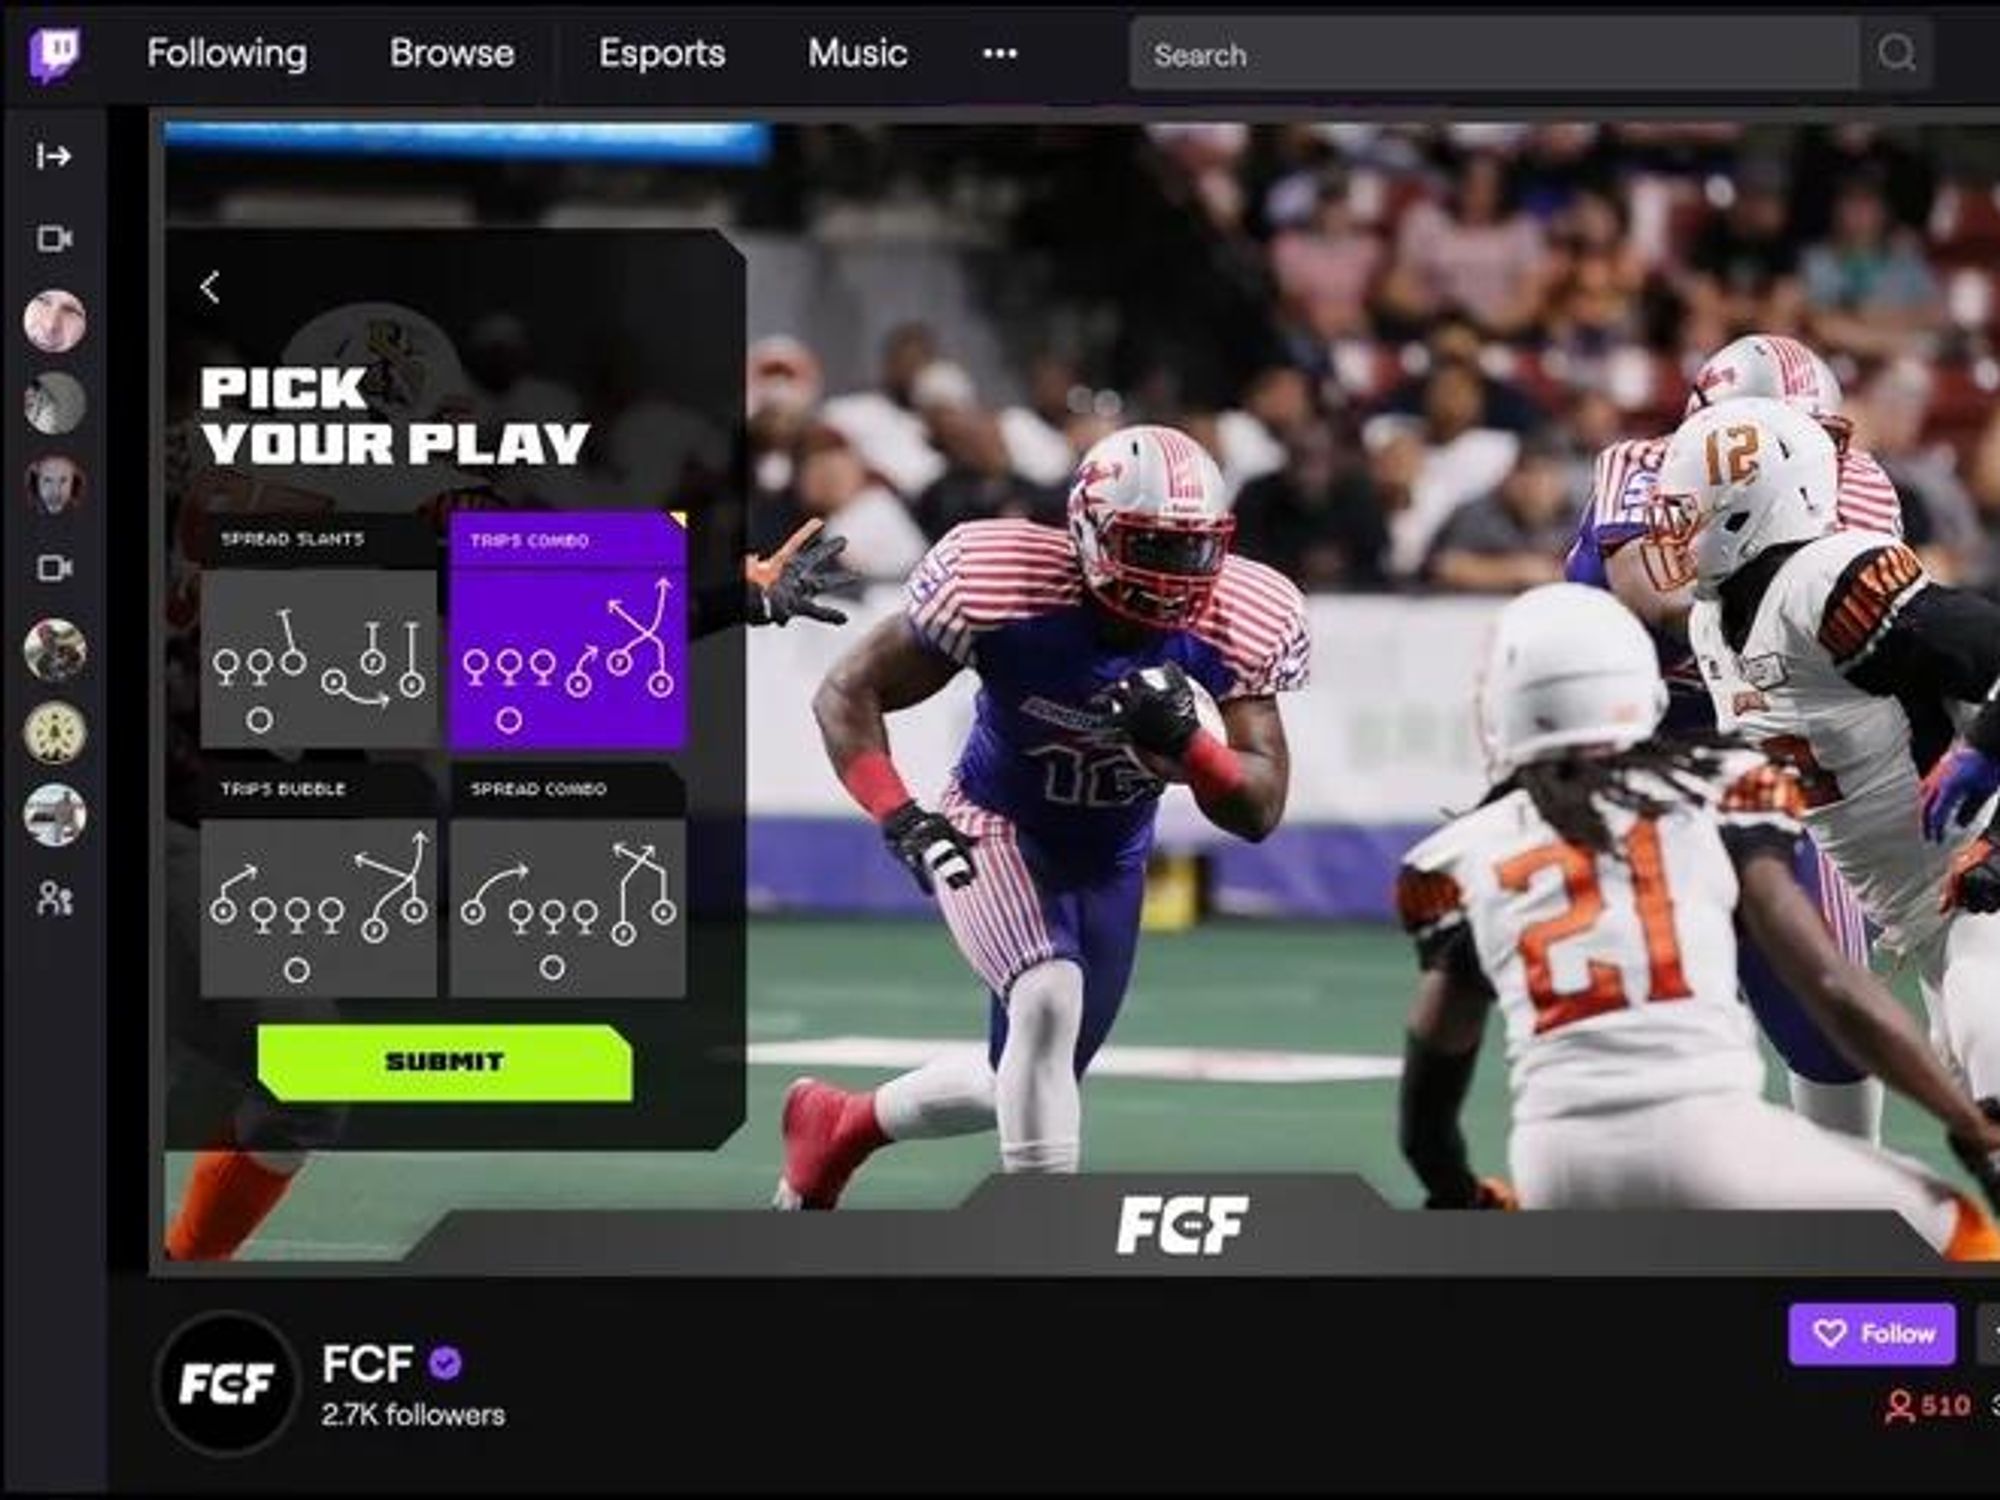 A menu for Fan Controlled Football on Twitch where fans pay for plays with NFTs.